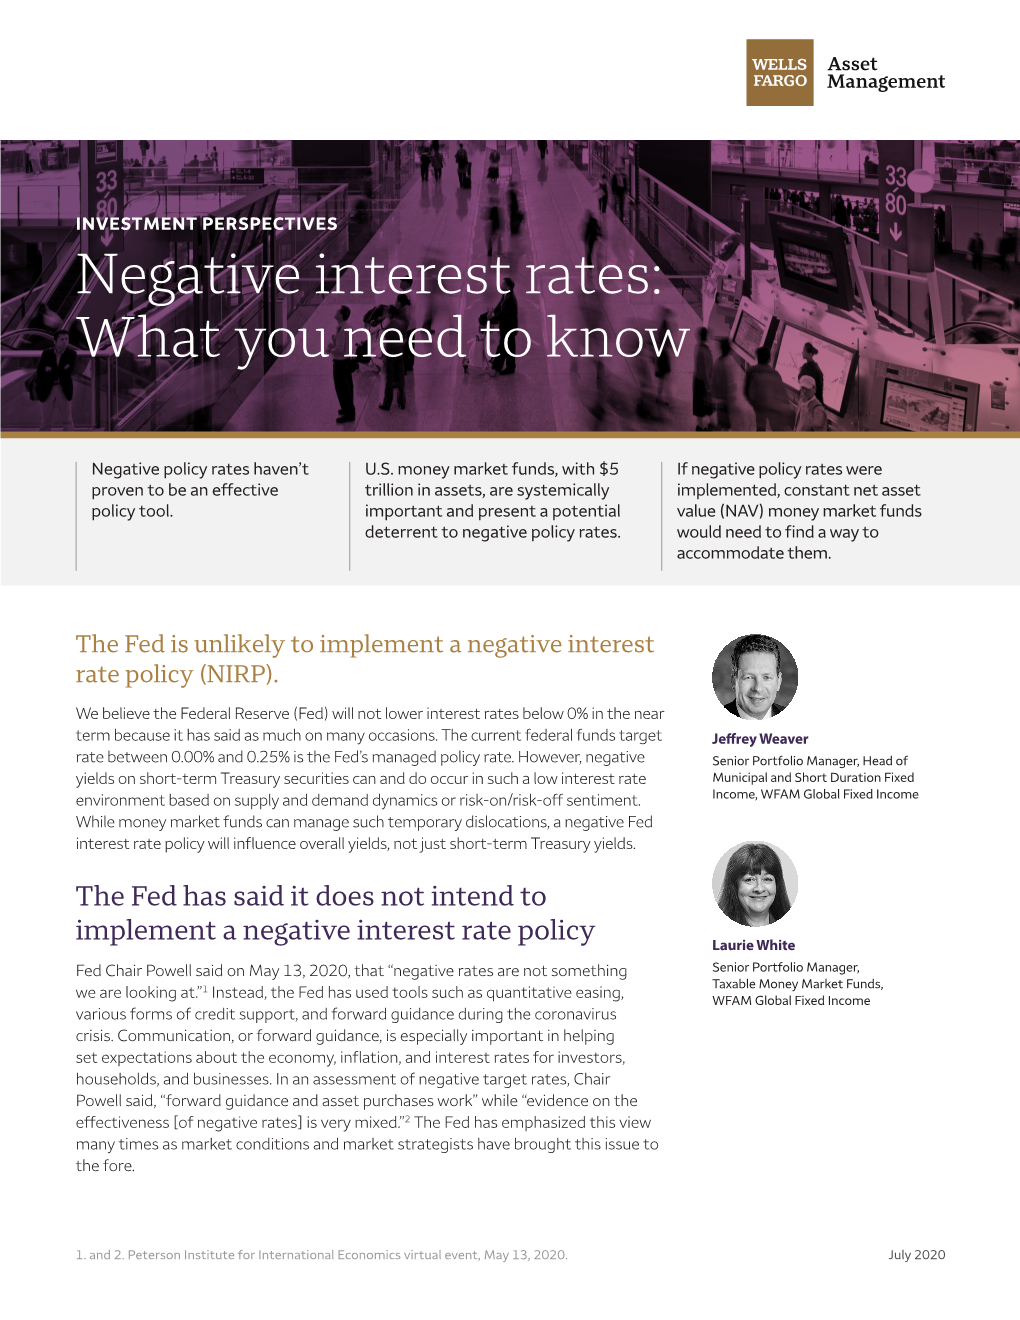 Negative Interest Rates: What You Need to Know